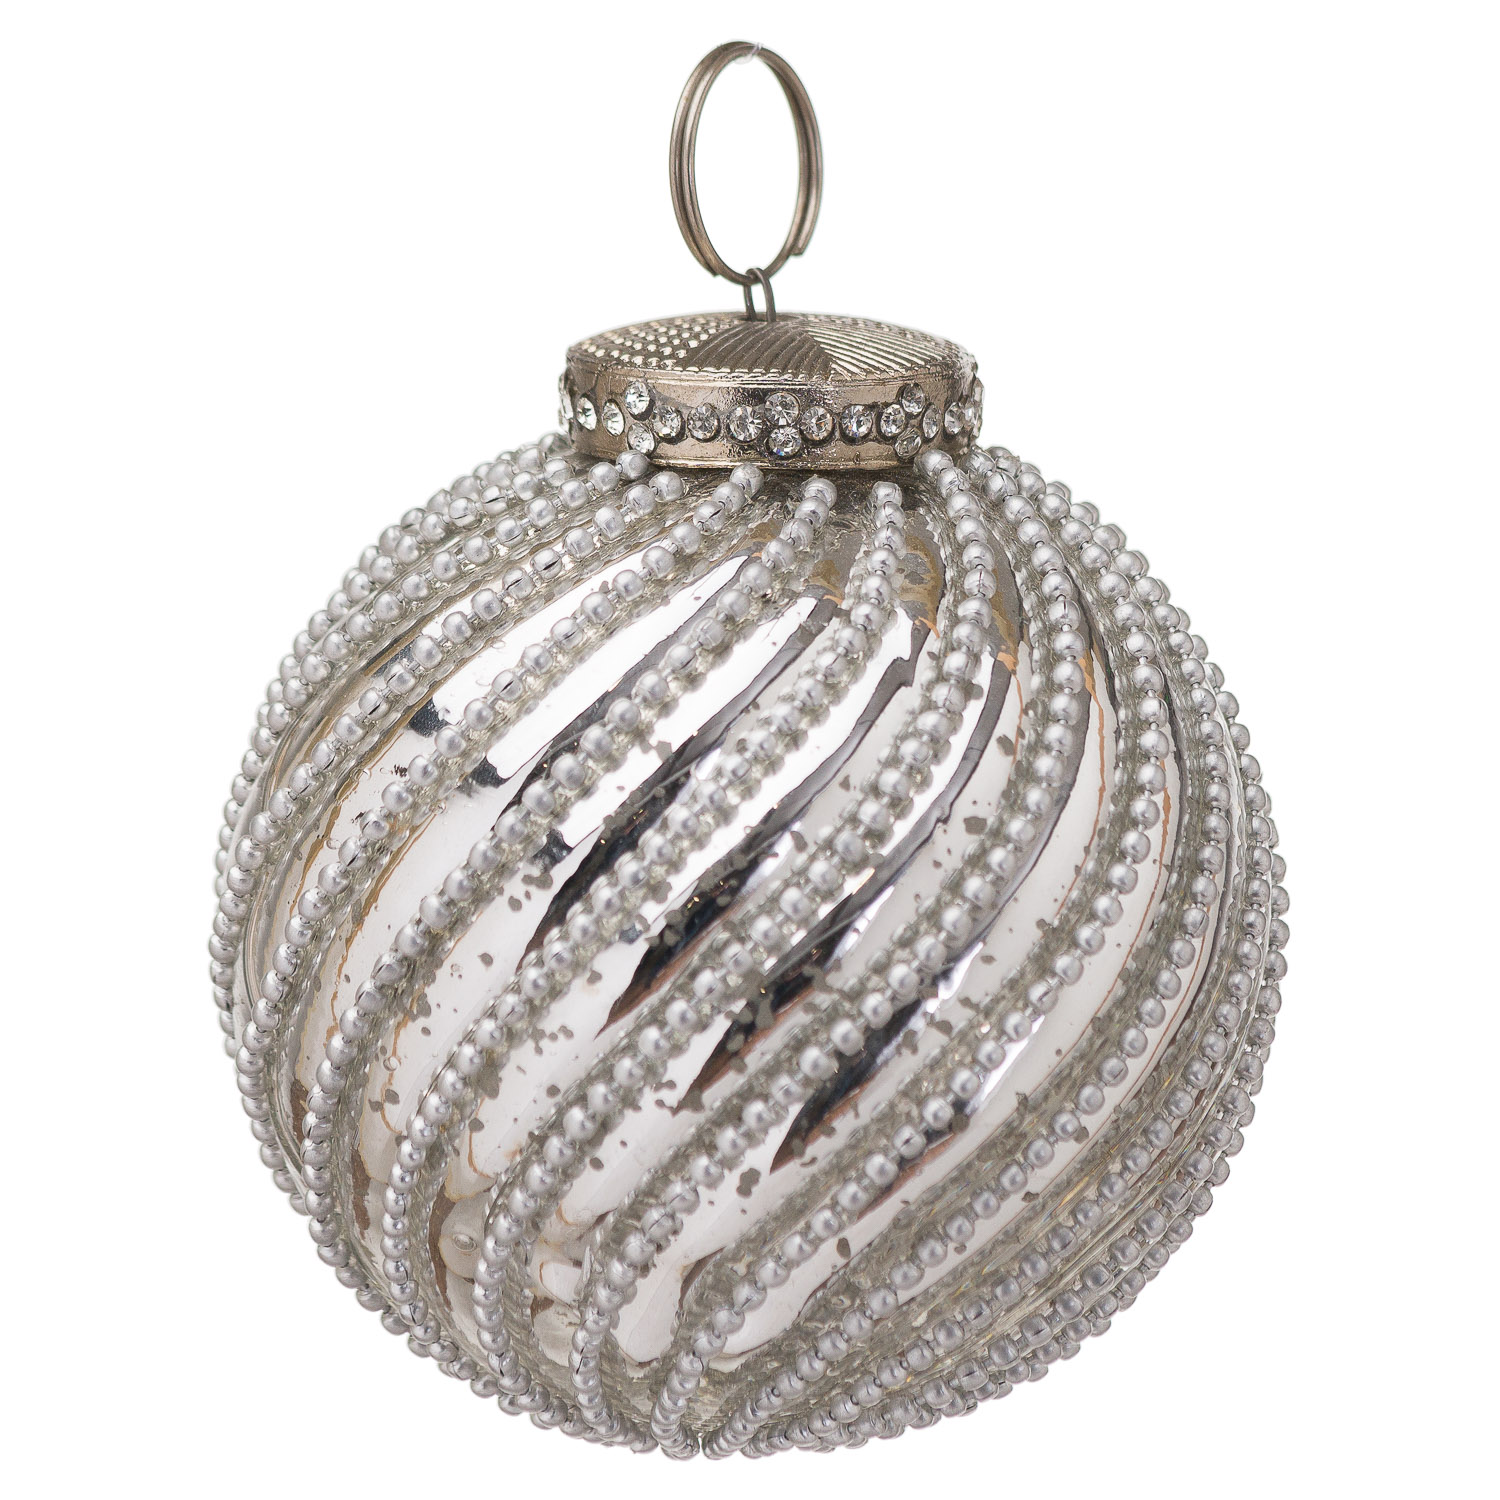 The Noel Collection Silver Jewel Swirl Large Bauble - Image 1